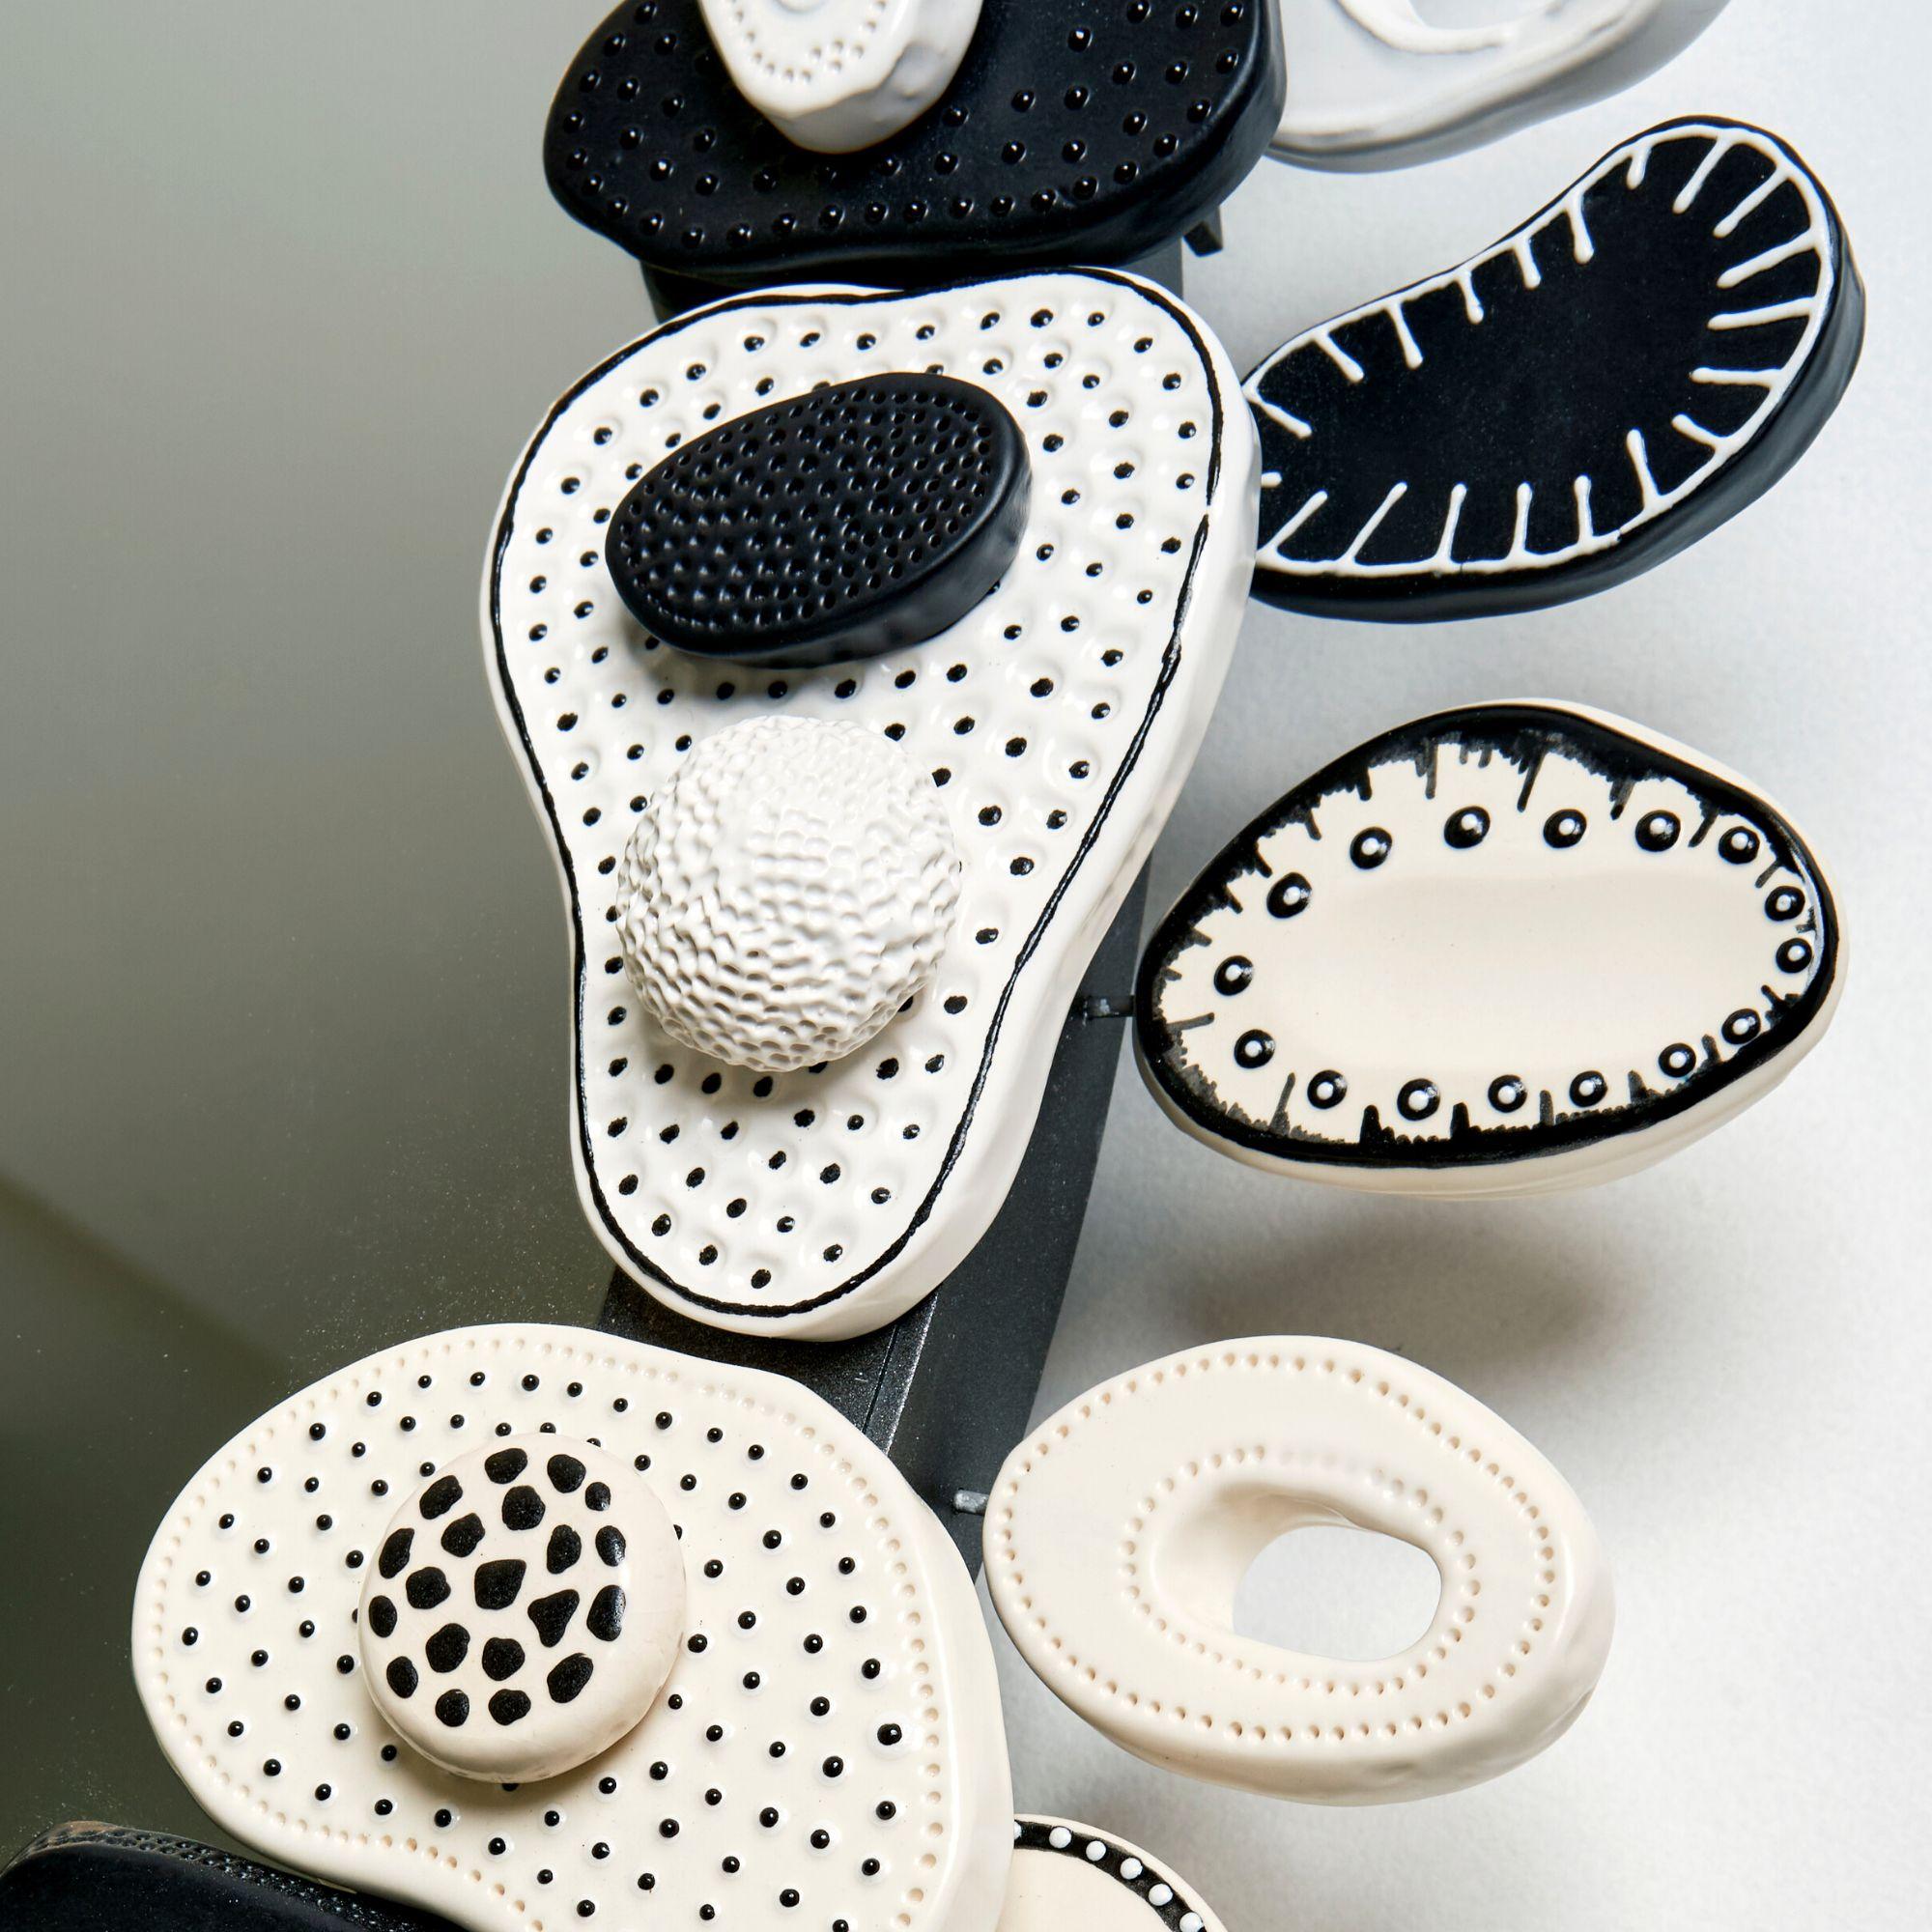 Ceramic mirror, handmade
Vegetal and organic shapes are sources of inspiration for the artist, in which she infuses her vivid imagination and her know-how.